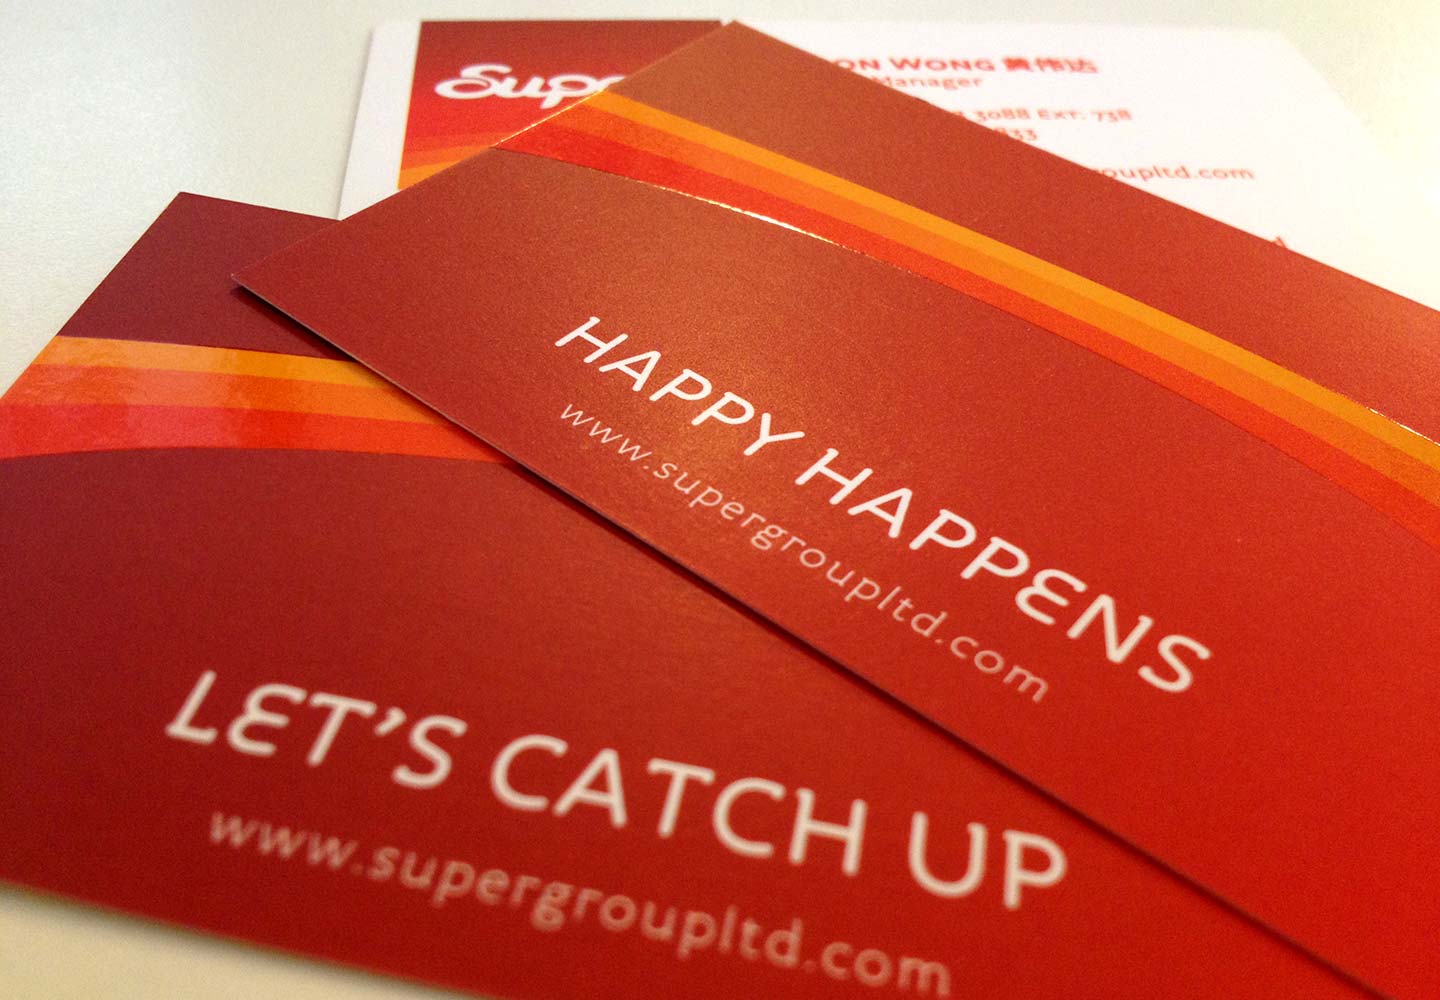 Brand Consultancy in FMCG Industry. Business Card for Super.